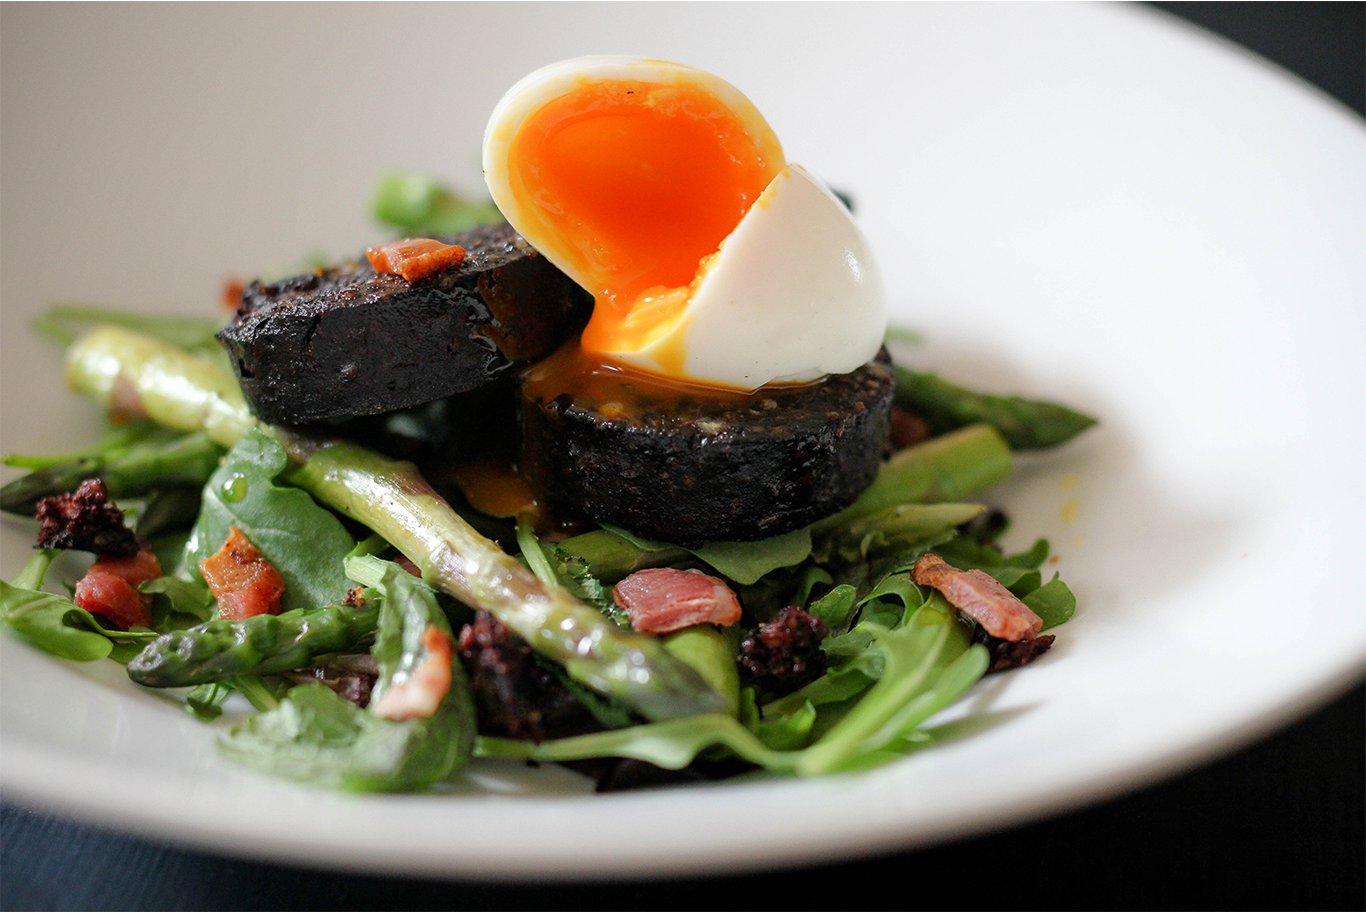 black pudding on a bed of salad and asparagus topped with a boiled egg